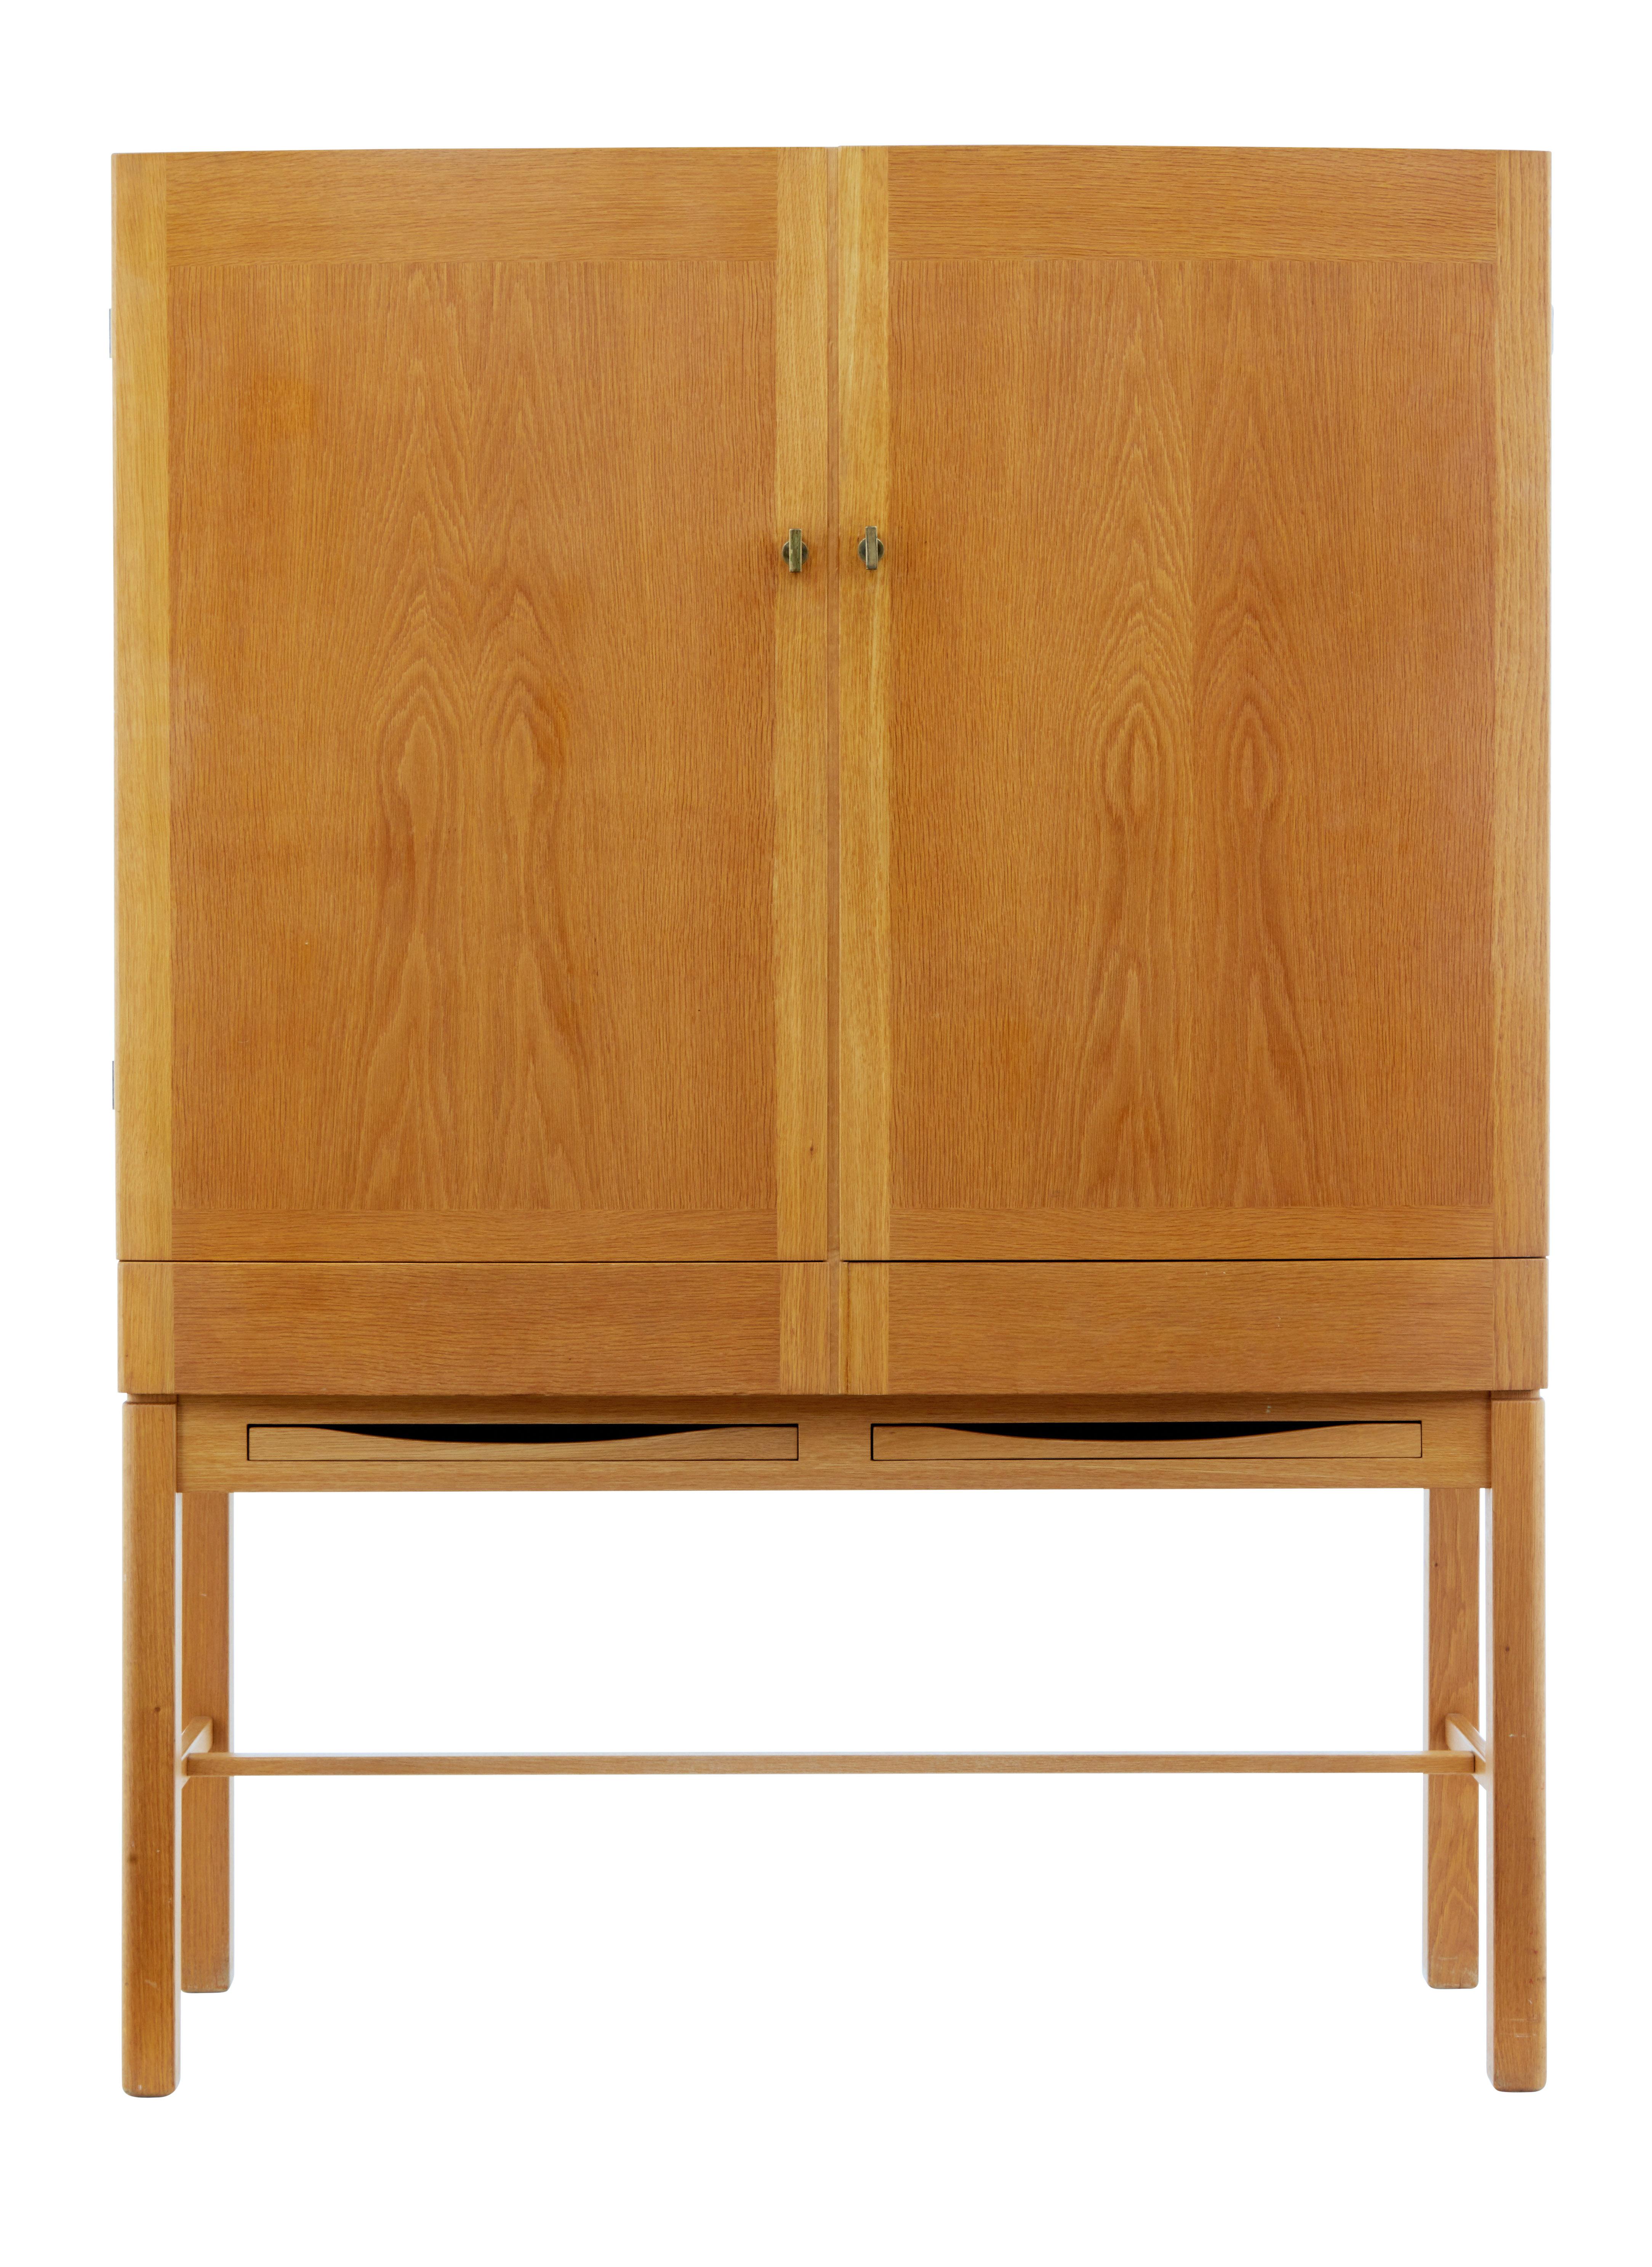 Fine quality Scandinavian cabinet designed by Gunnar Mystrand for Kallemo.

Oak double doors open to a partially fitted interior. Central partition with 2 shelves on either side and 2 drawers on the right hand side. Below the cabinet are a further